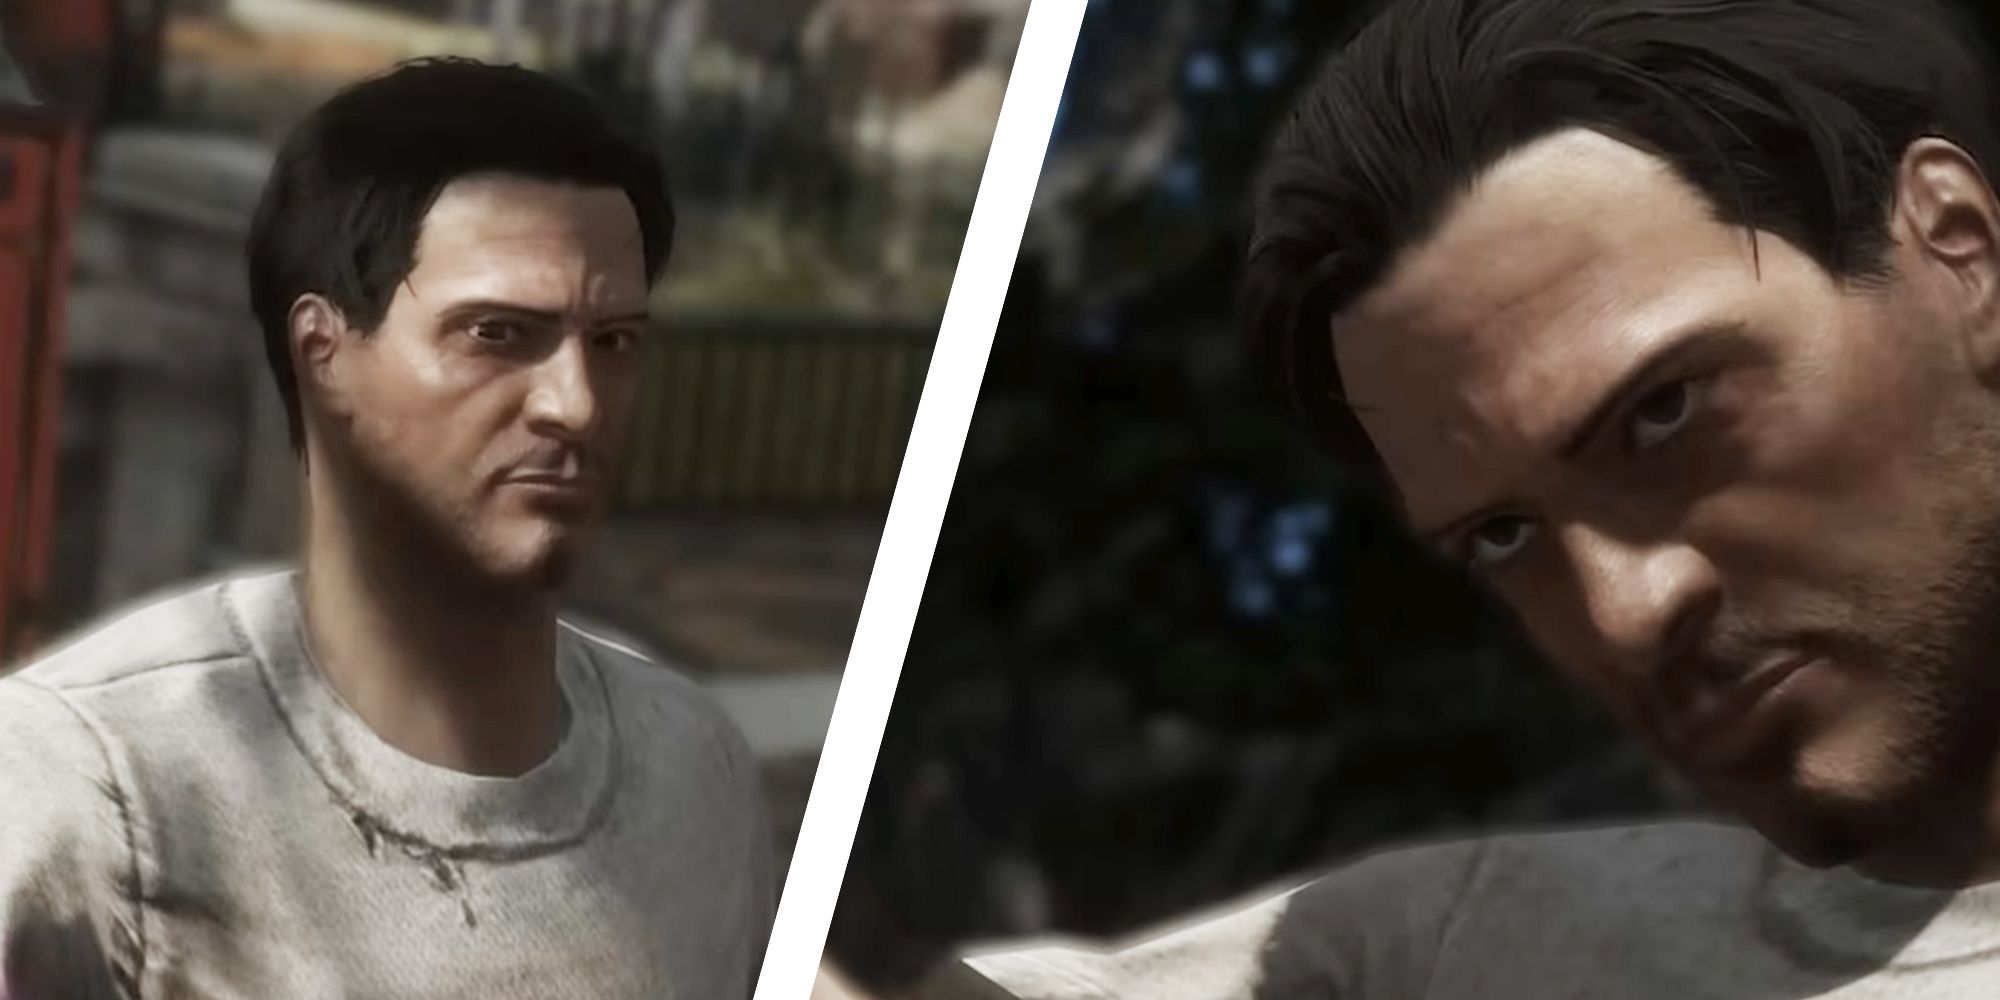 Neil Newbon character in Fallout London mod, left shows him from chest up, right image shows his head tillted as he looks past the camera